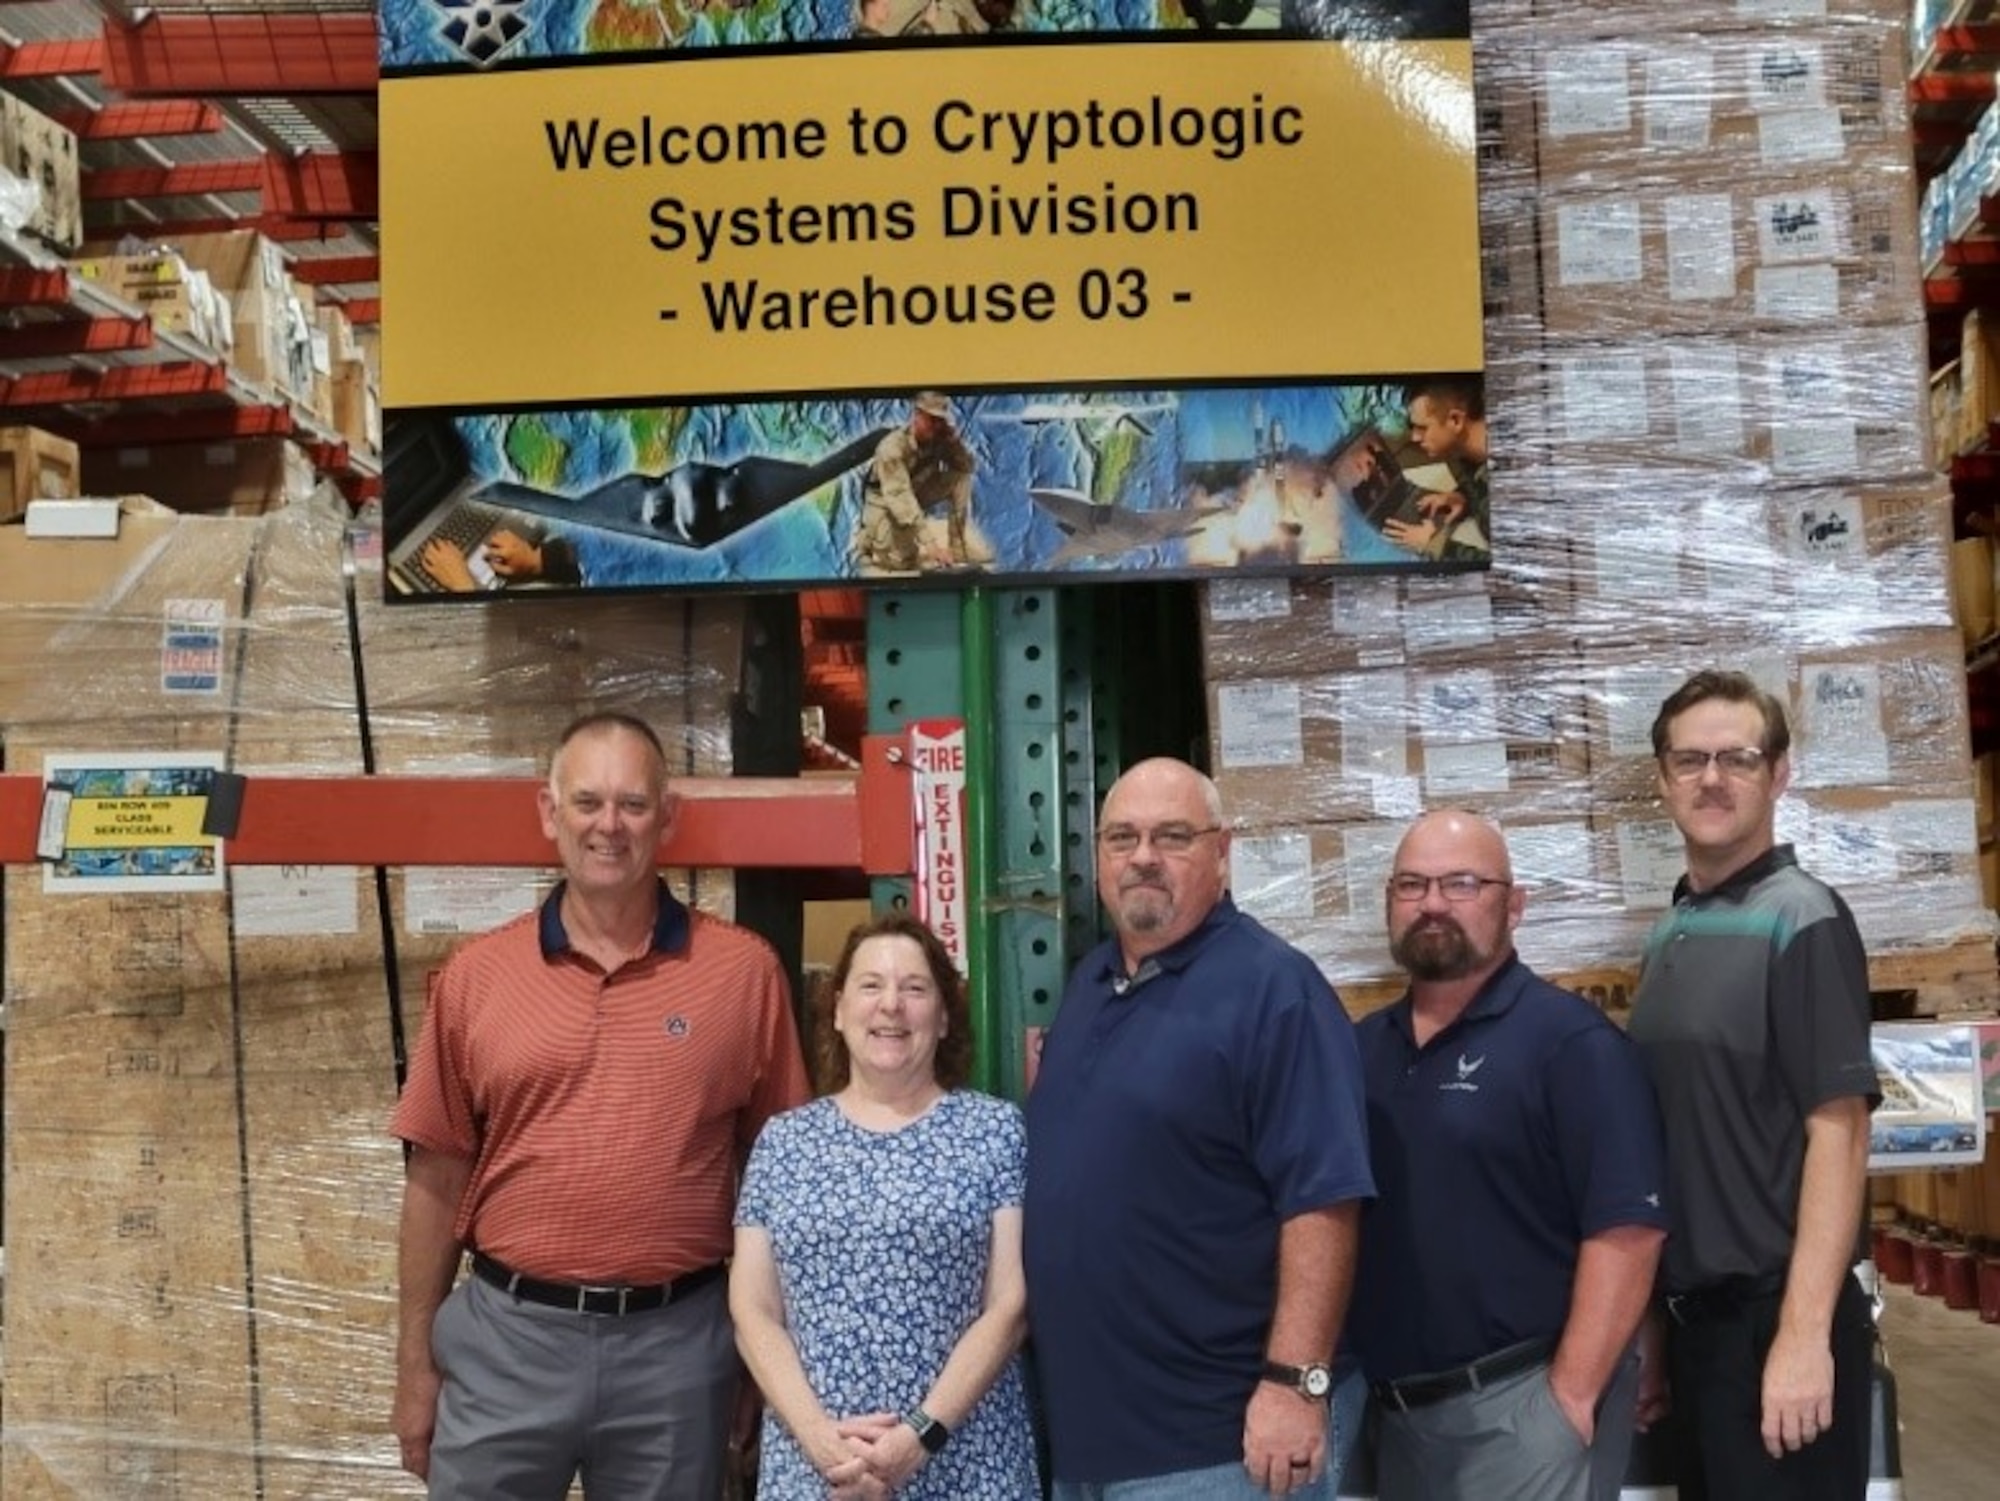 From left, Scott Hunter, ILS-S SME; Barbara Craig, CDAS Program Manager; Curt Bollinger, Chief of Inventory; Allen Pratt, ILS-S SME; and Todd Landuyt, ILS-S SME, gather at the HNC 03 Warehouse, Joint Base San Antonio-Lackland, Texas, July 28, 2022. (U.S. Air Force photo)